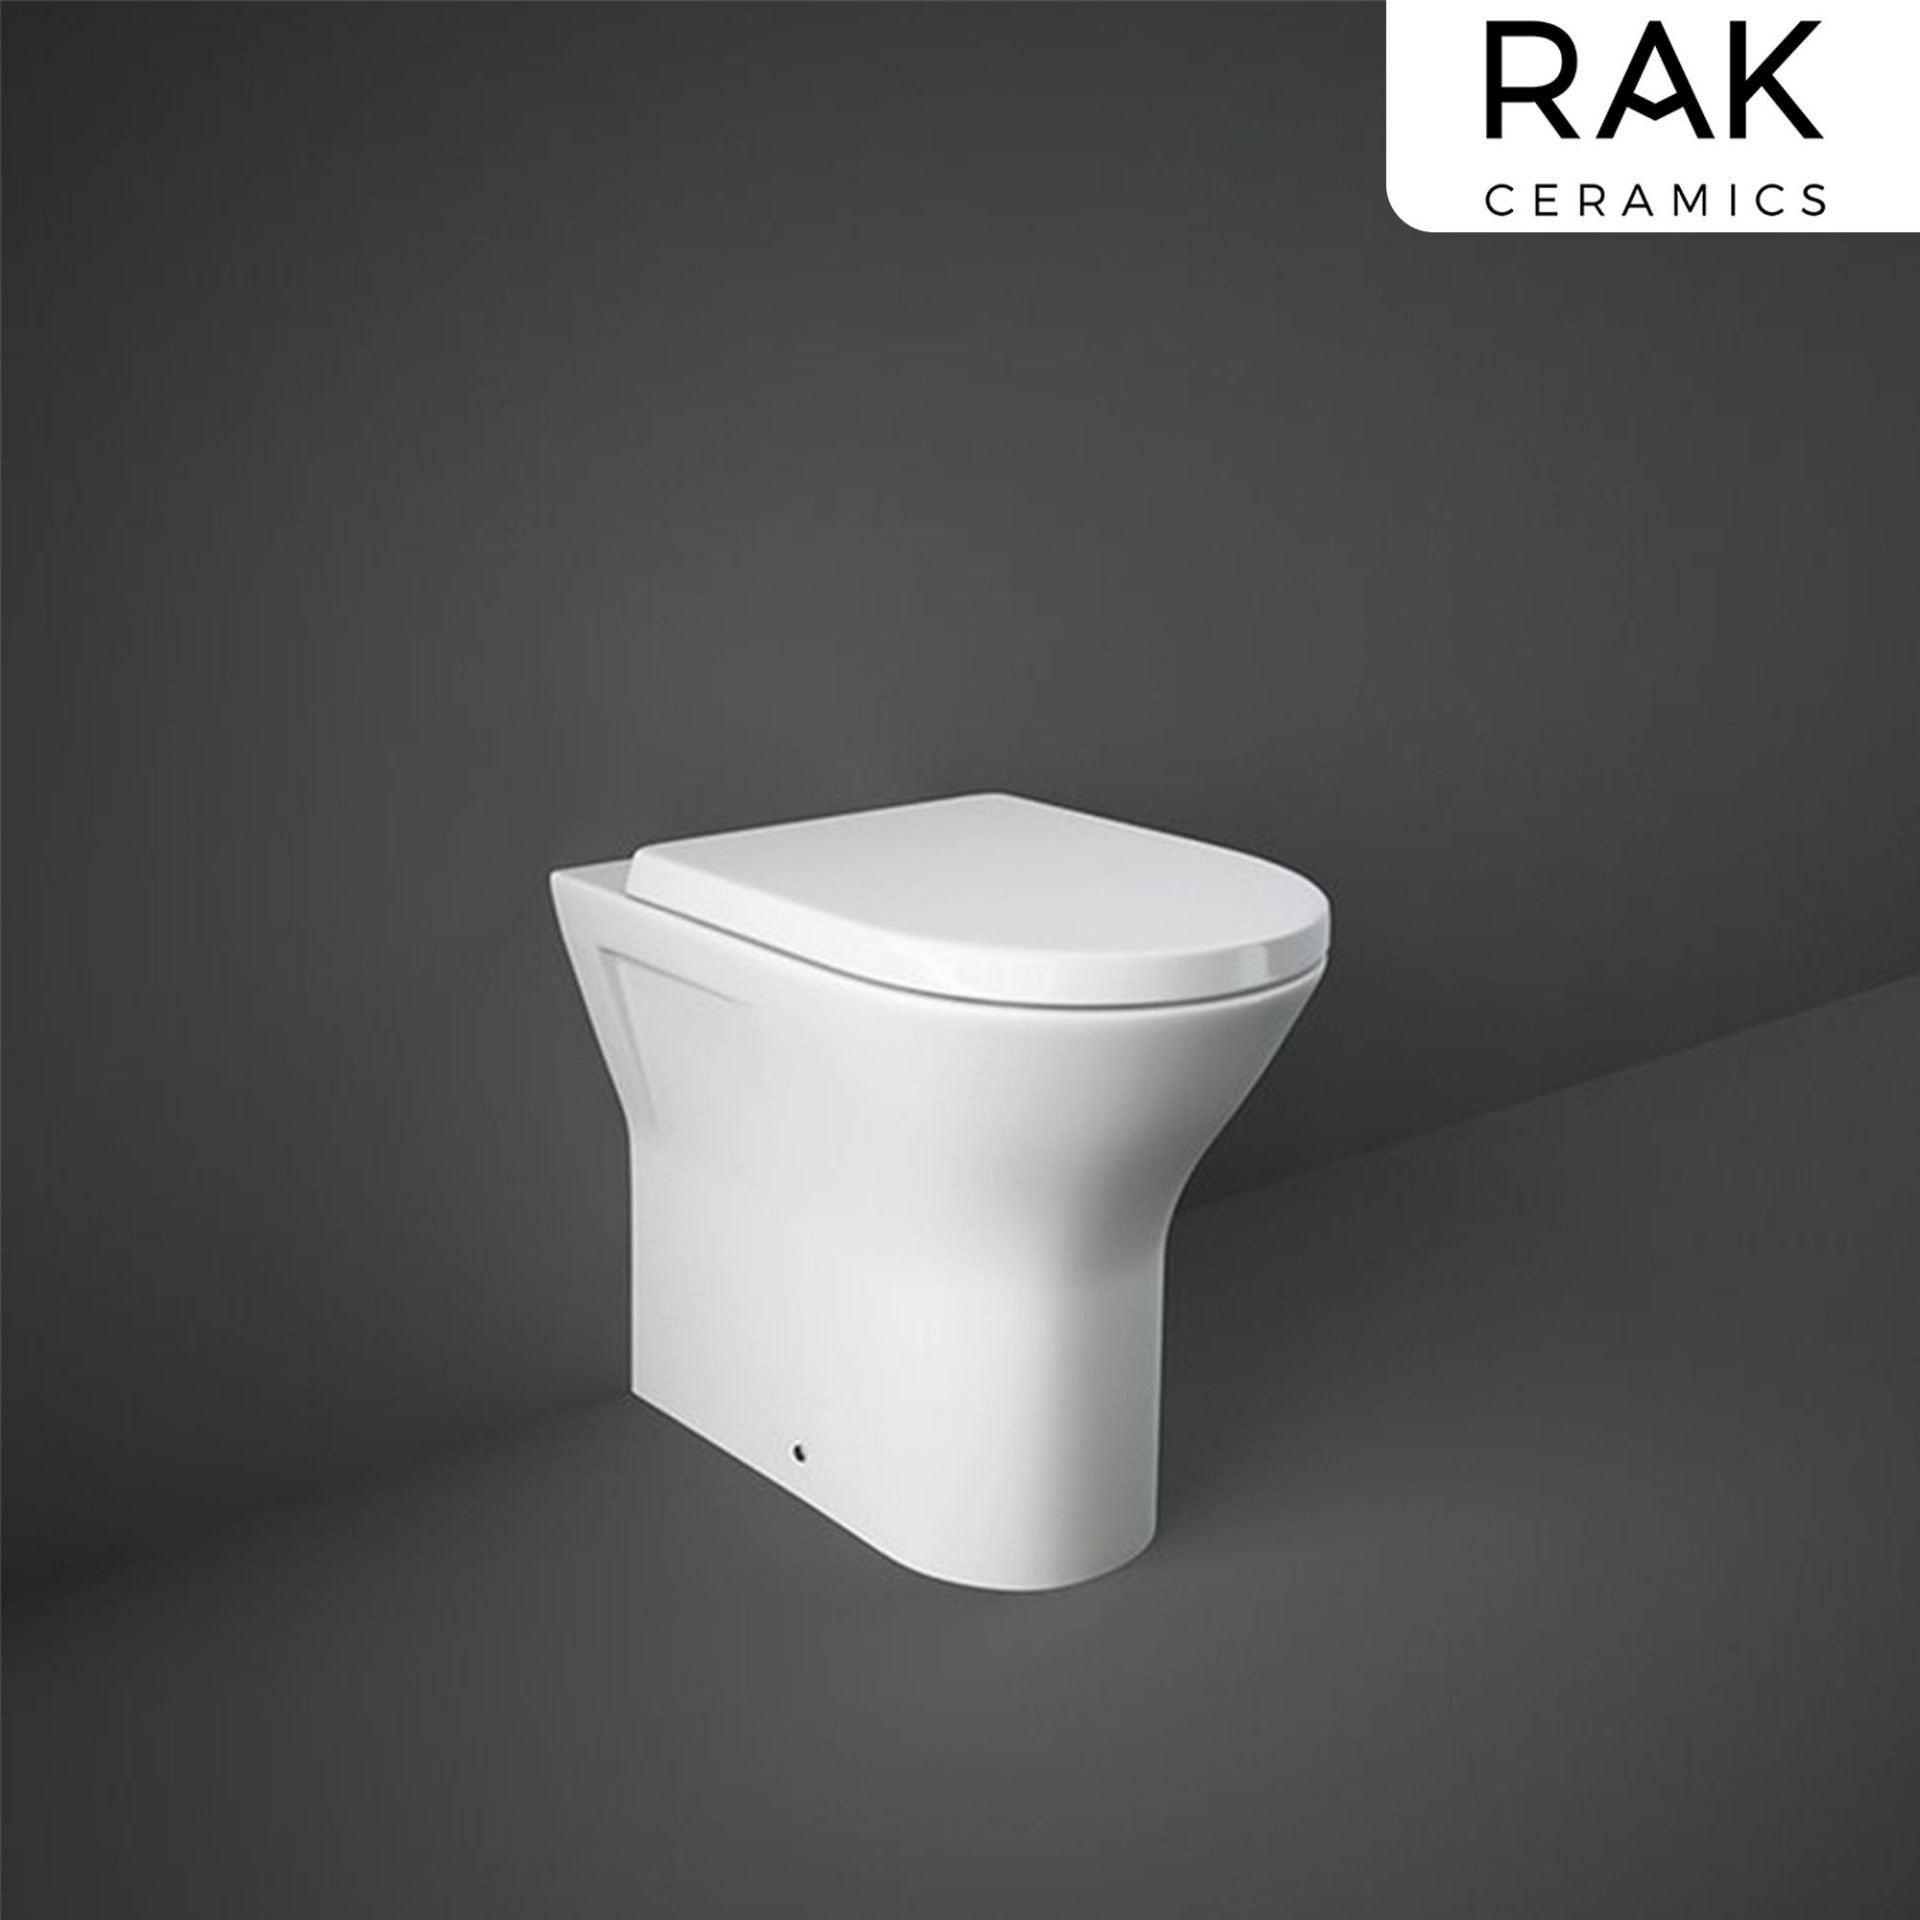 (OS241) RAK Resort Rimless Back to Wall Toilet Rimless design makes it easy to clean Anti-scratch